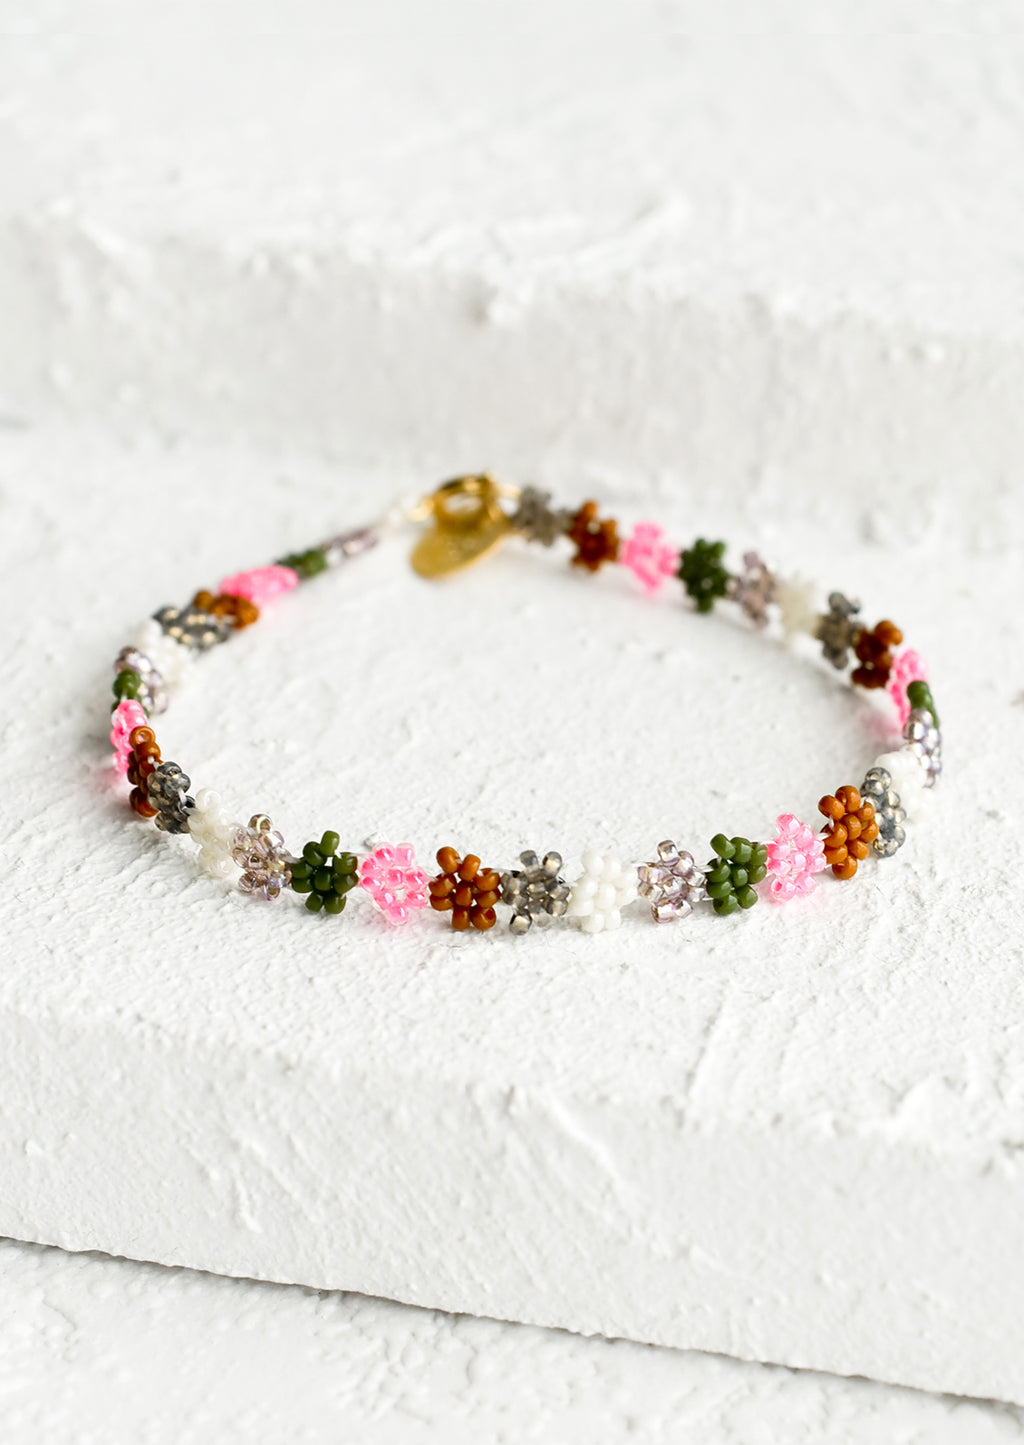 Neon Pink Multi: A beaded bracelet in flower shape in neon pink, olive, white and brown.